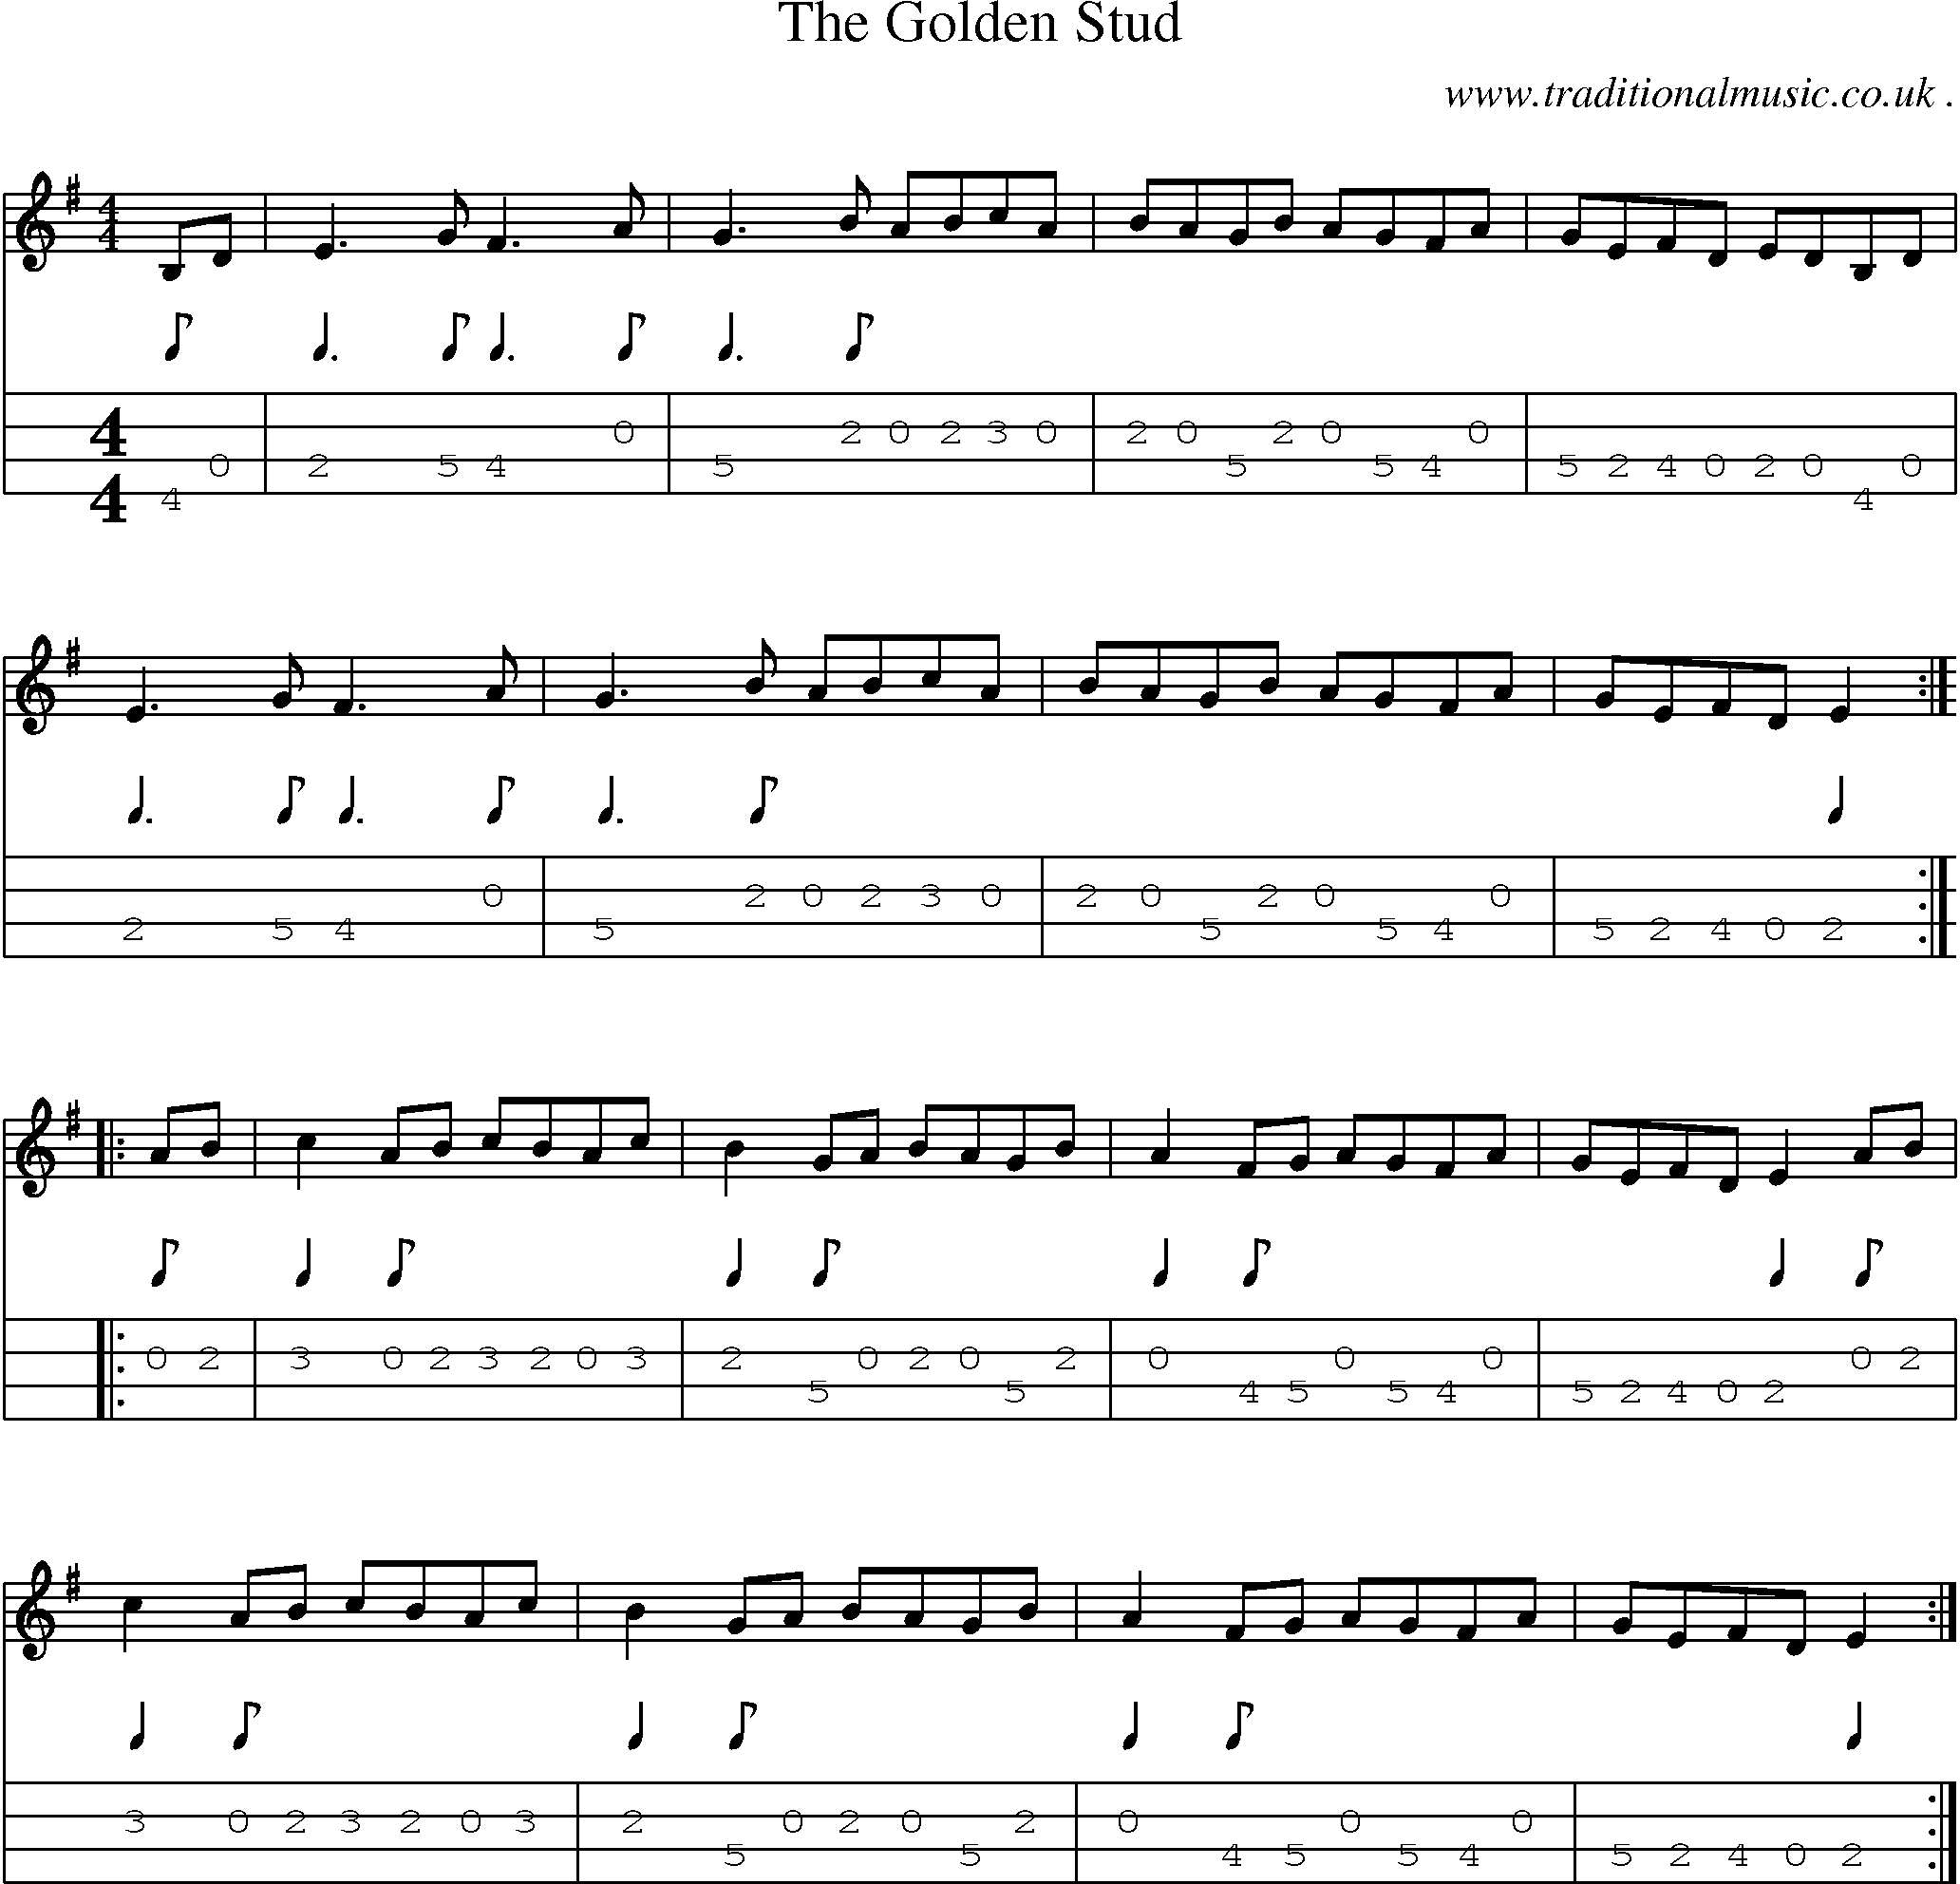 Sheet-Music and Mandolin Tabs for The Golden Stud